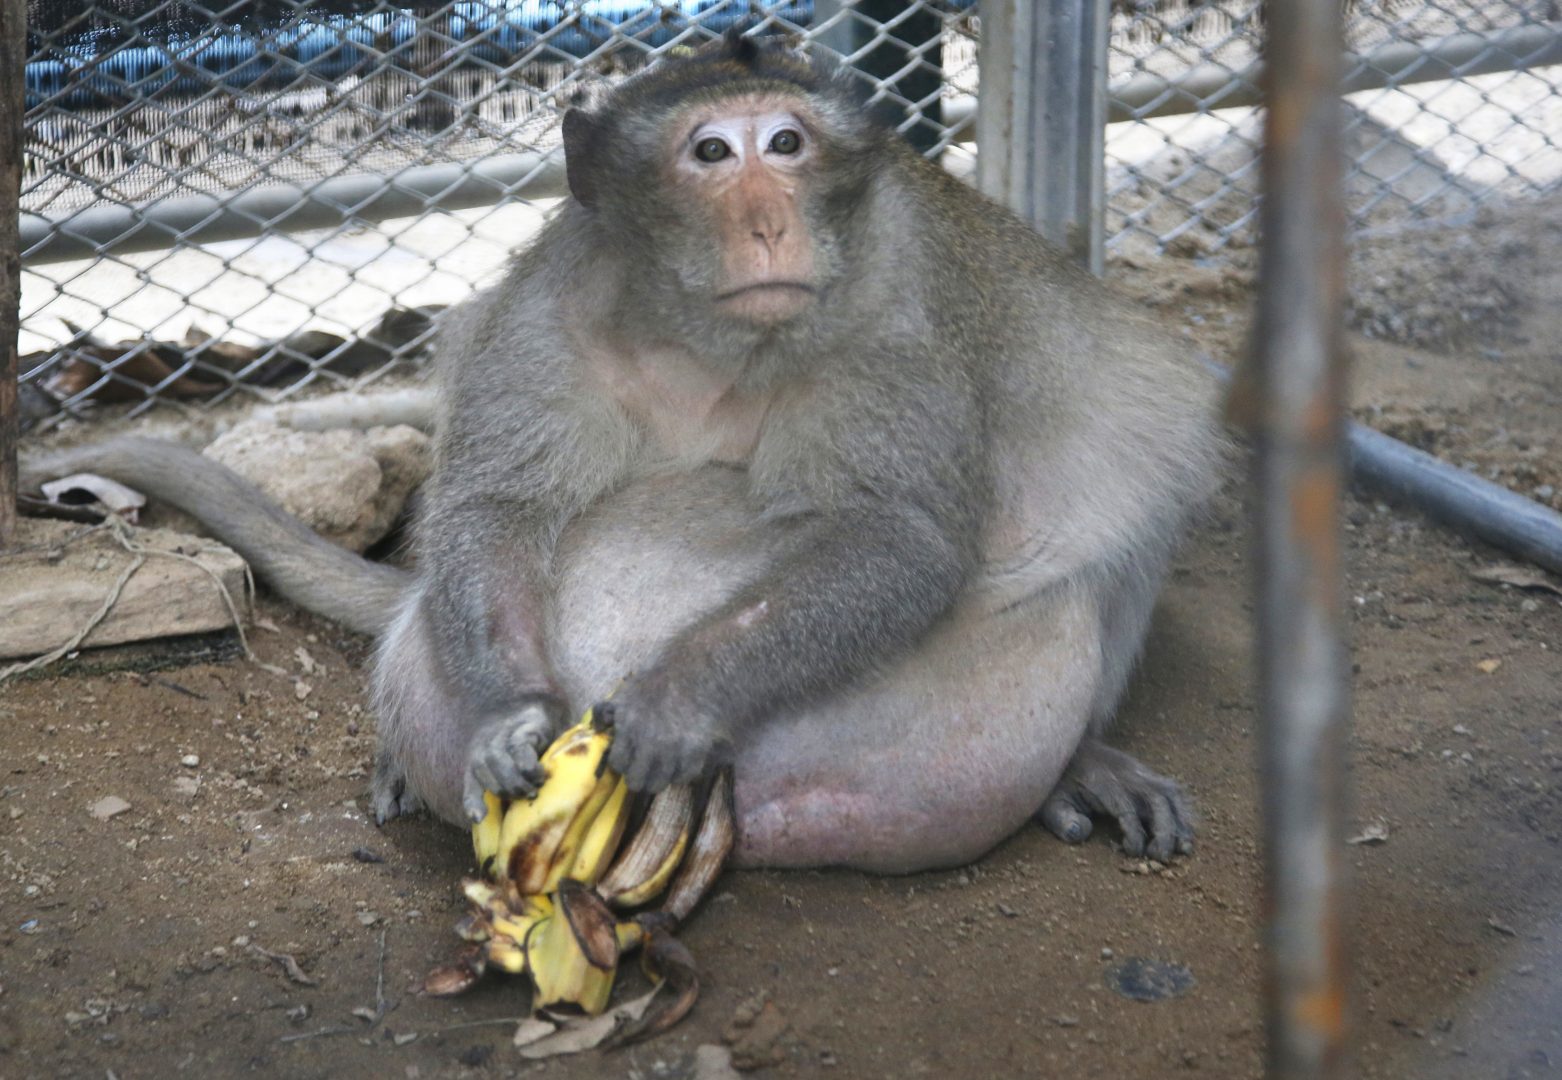 In video: Chunky monkey put on diet after gorging on junk food.